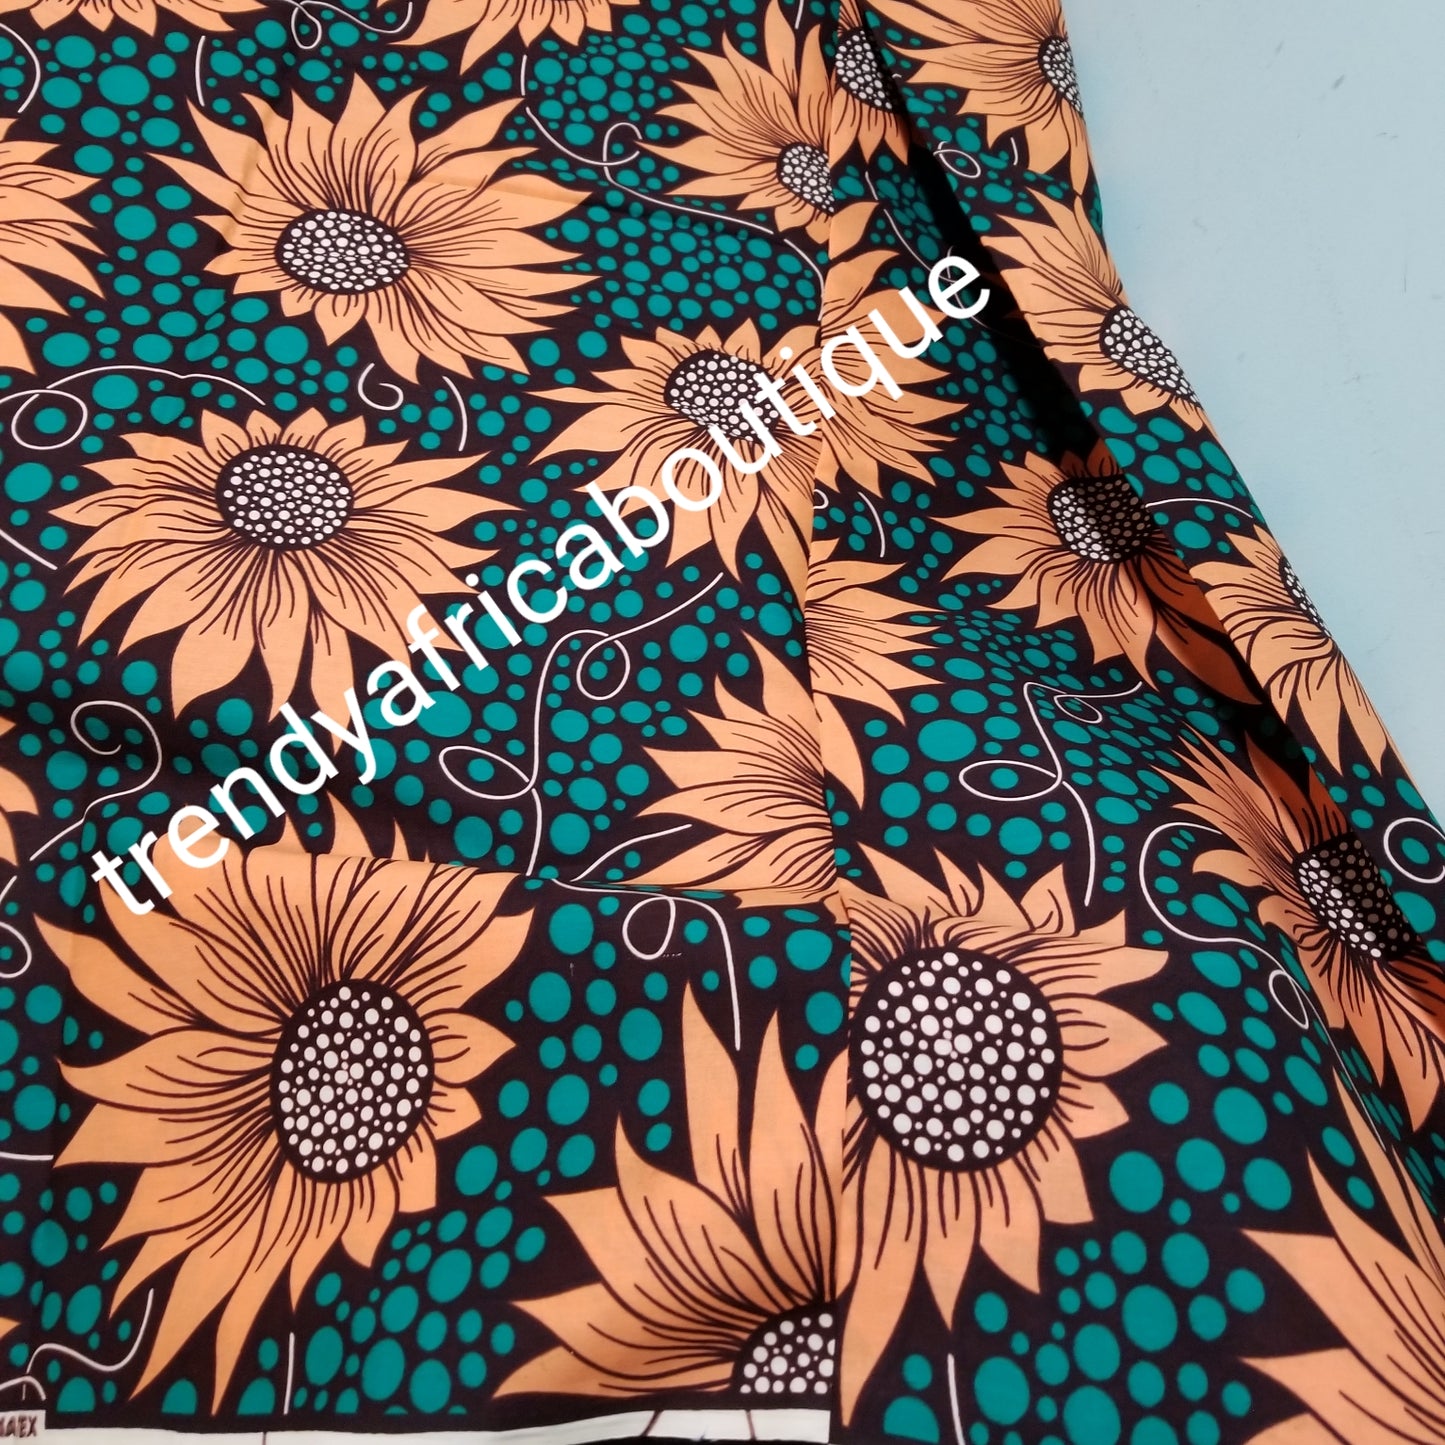 Teal green/peach 100% veritable cotton Ankara wax print fabric. Sold per 6yds. Price is for 6yds. Soft texture. Excellent quality for making fabulous African outfit